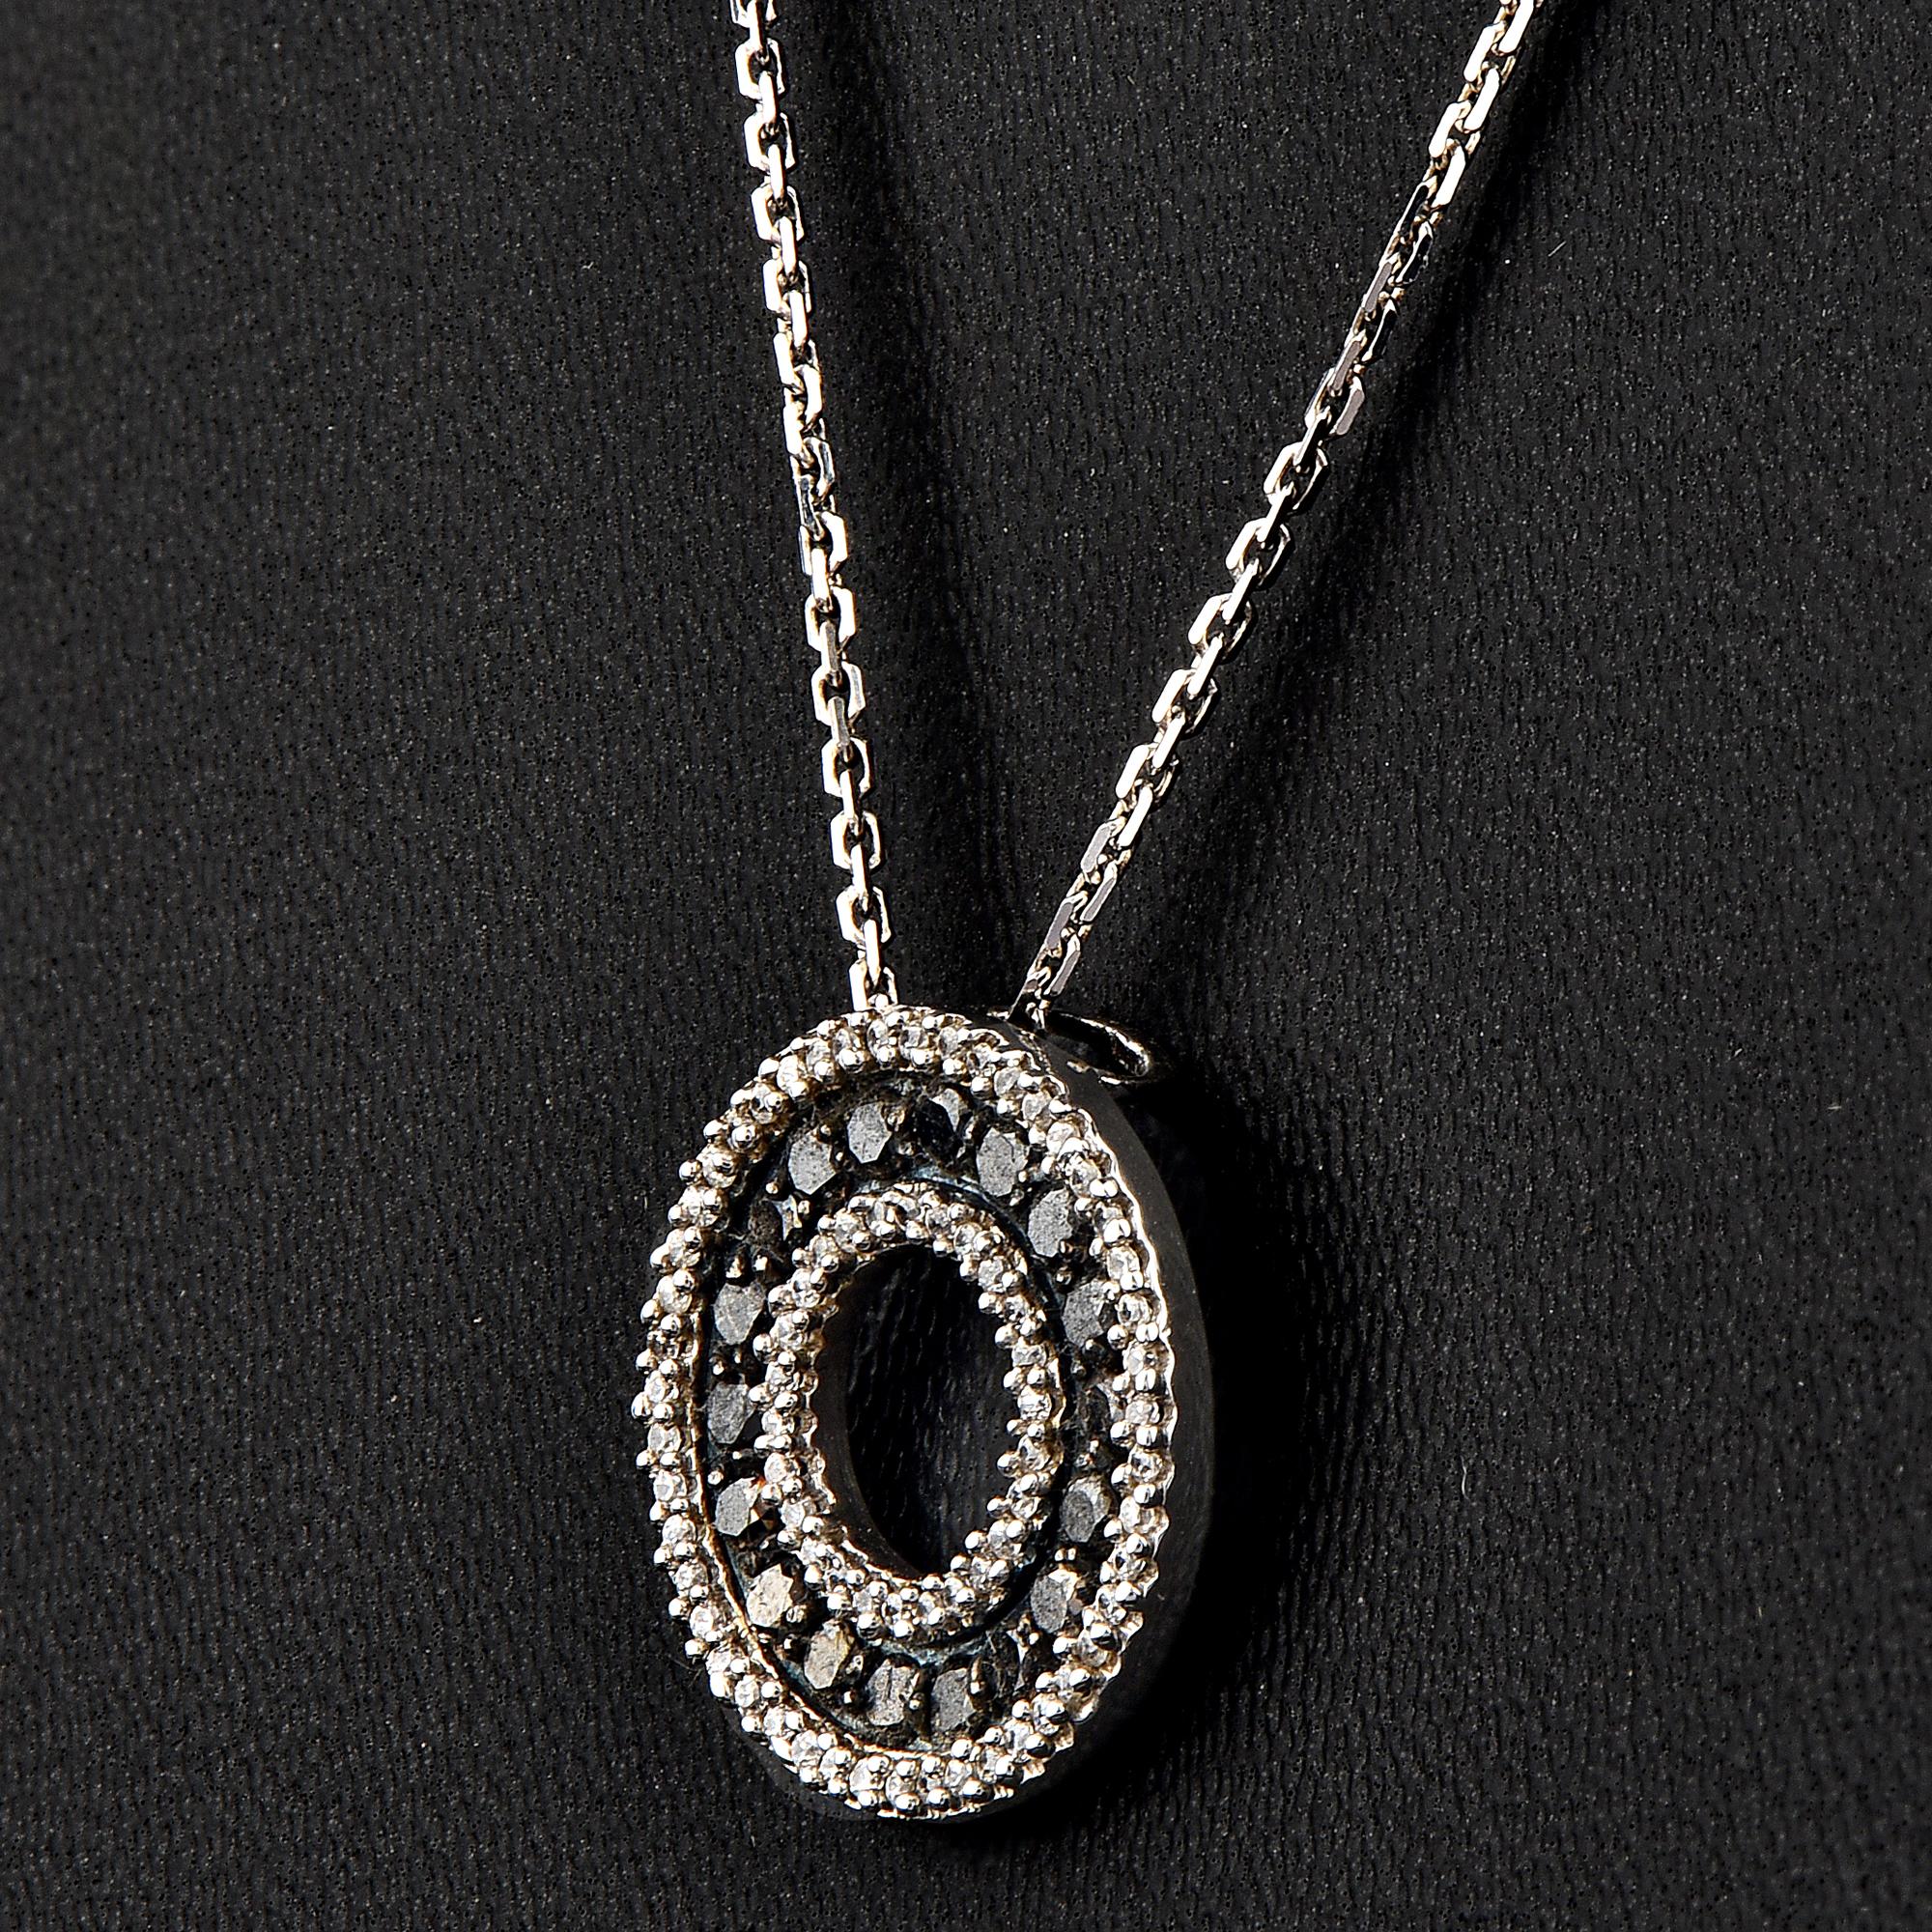 A striking addition when worn on its own, this diamond pendant makes a stunning impression. The pendant is crafted from 14-karat gold in your choice of white, rose, or yellow, and features Round Brilliant 73 white and 18 black diamonds micro-prong